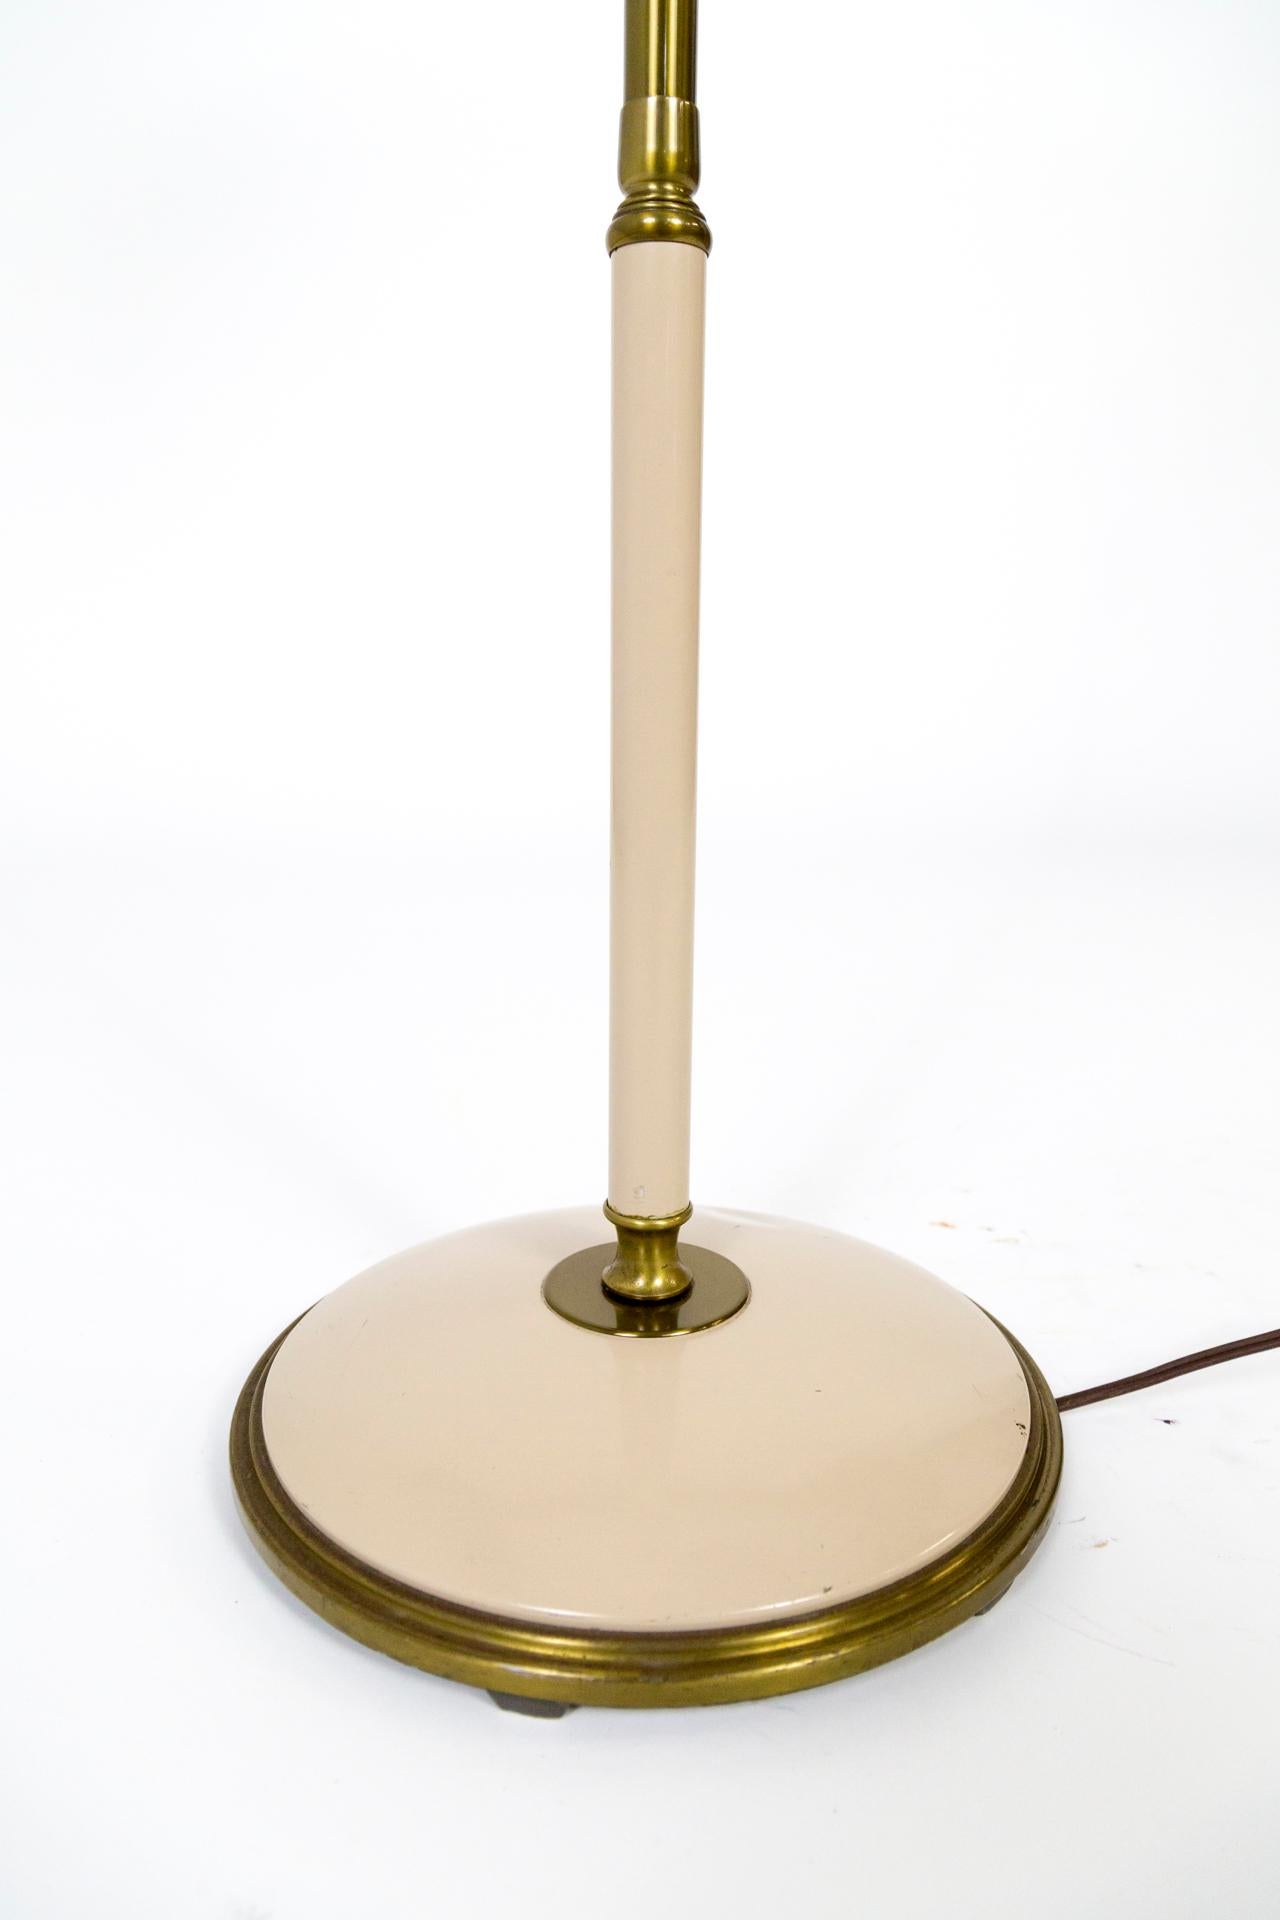 Dazor 1950s Flying Saucer Floor Lamp in Brass & Buff Lacquer In Good Condition In San Francisco, CA